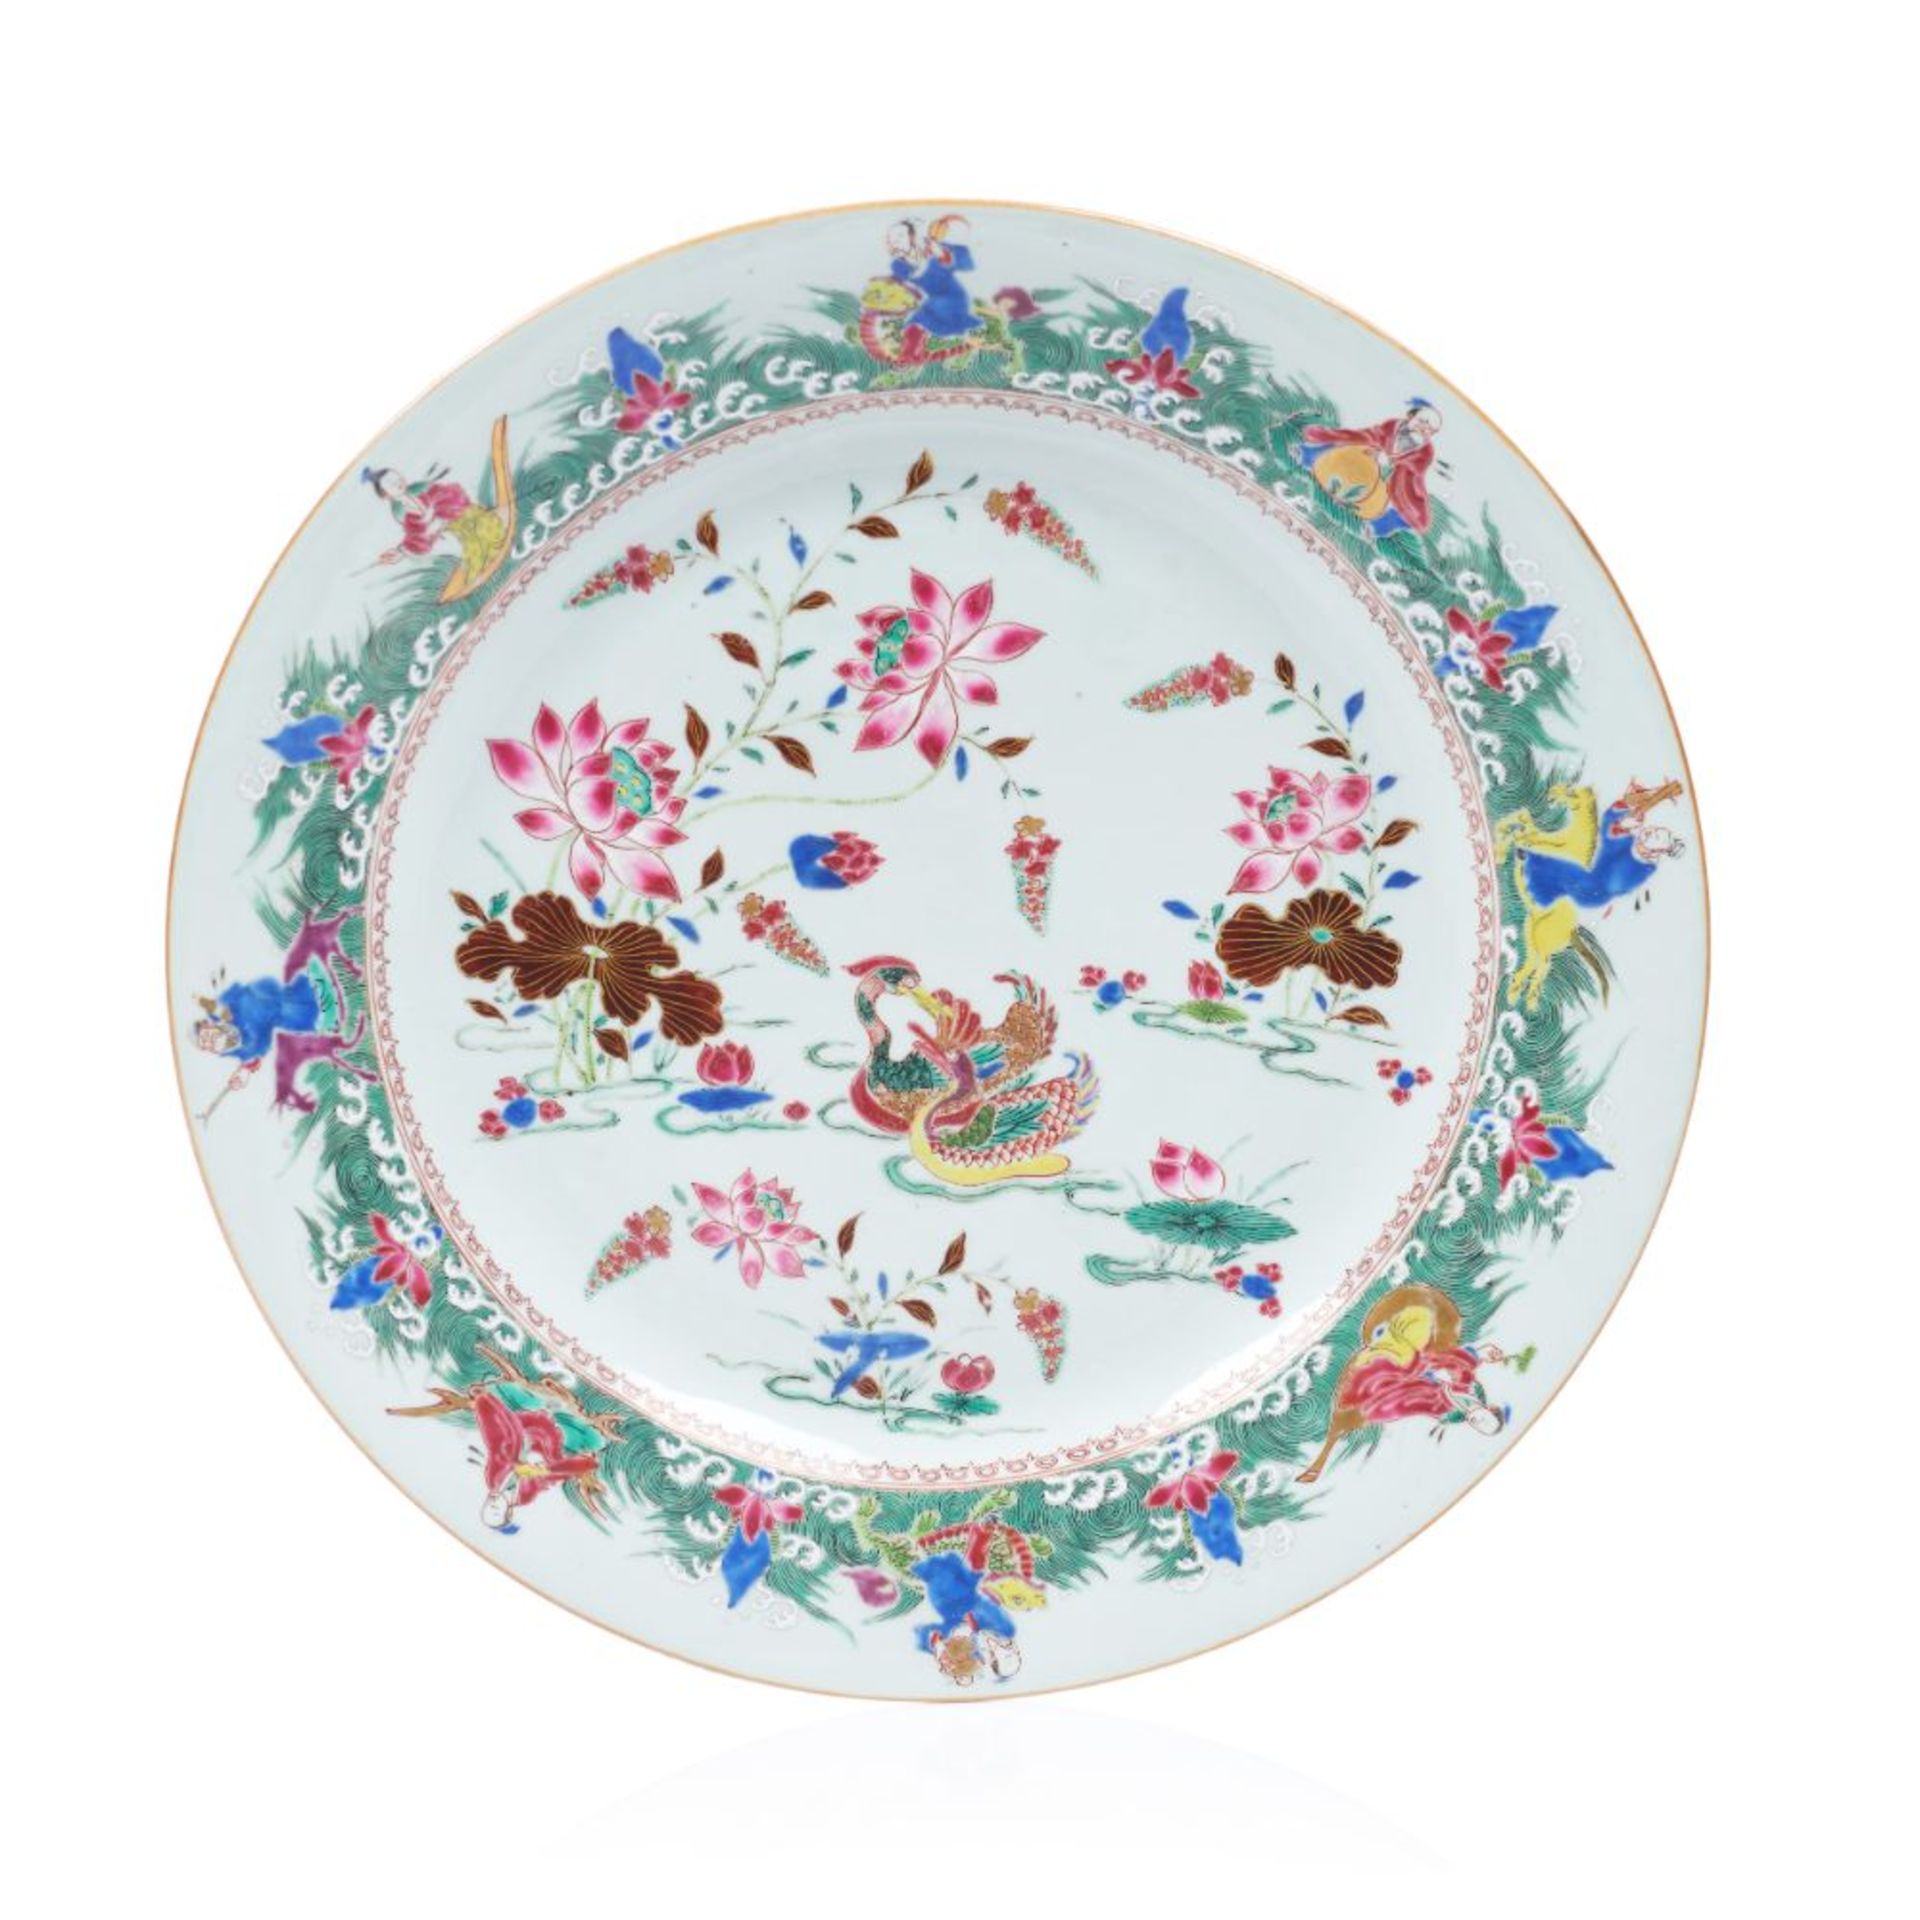 A large 'Mandarin Ducks and Daoist Immortals' plate, Chinese export porcelain, Polychrome "Famille